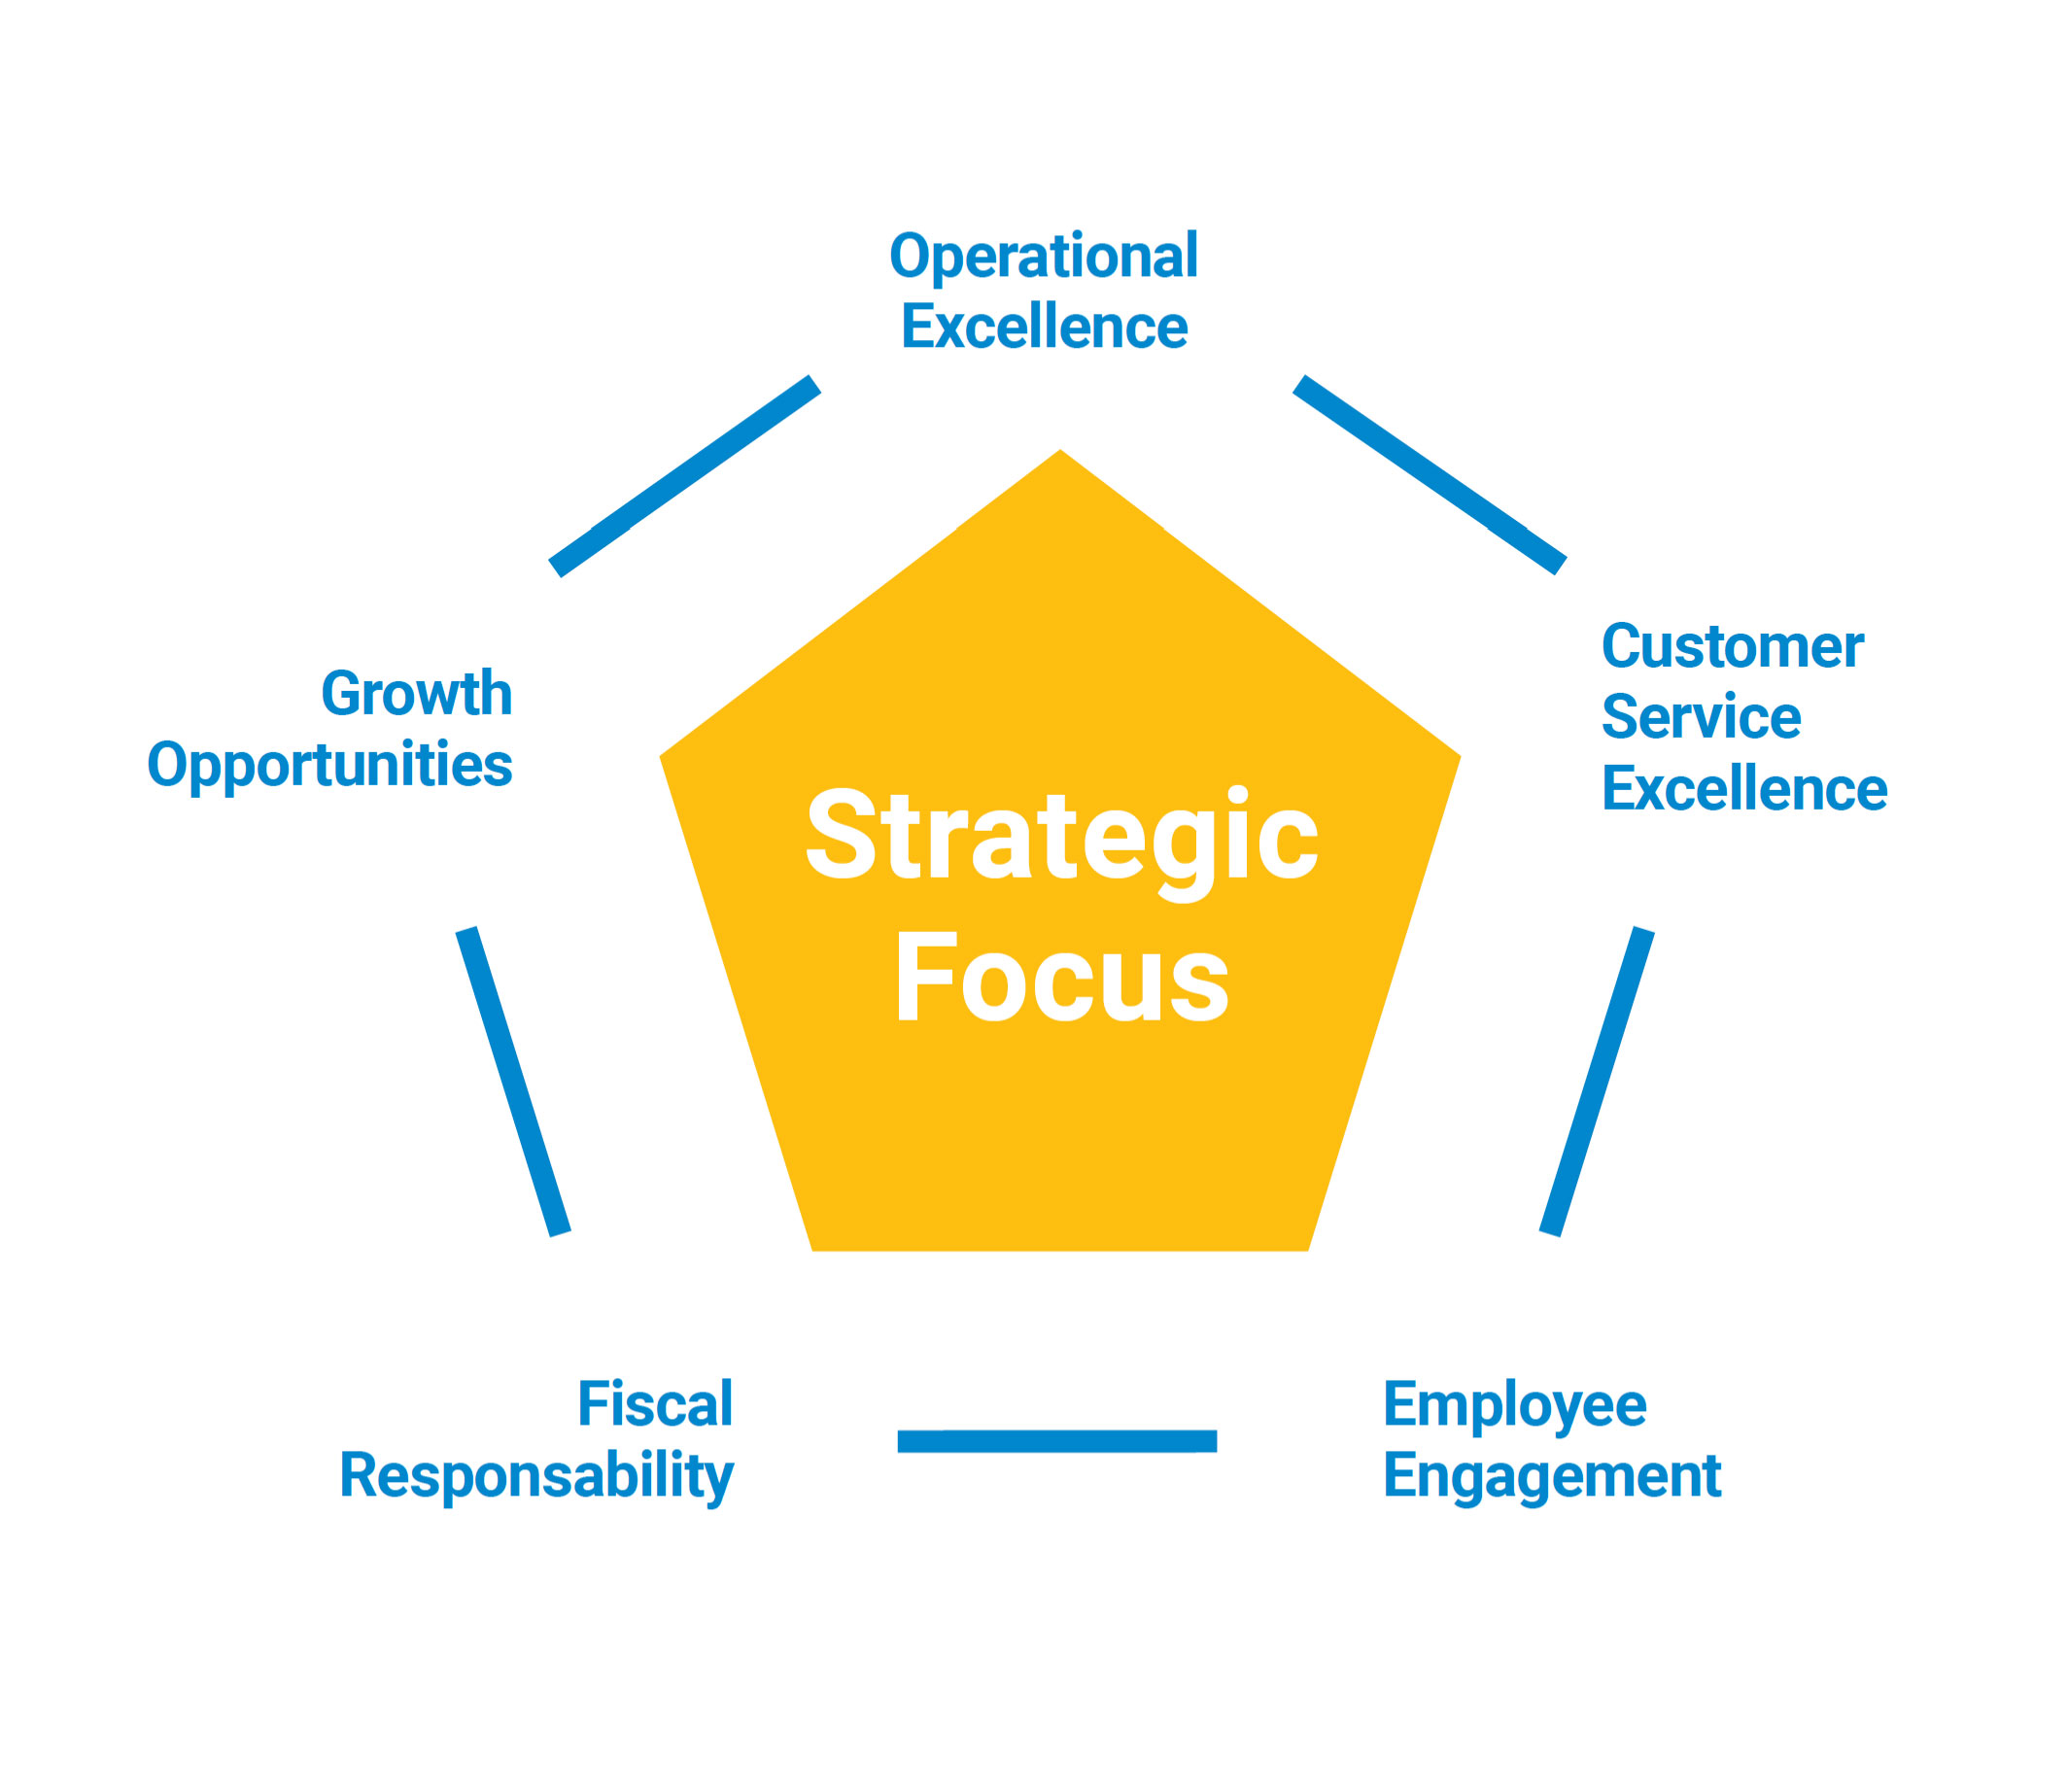 Strategic Focus surrounded by Operational Excellence, Customer Service Excellence, Employee Engagement, Fiscal Responsibility, and Growth Opportunities